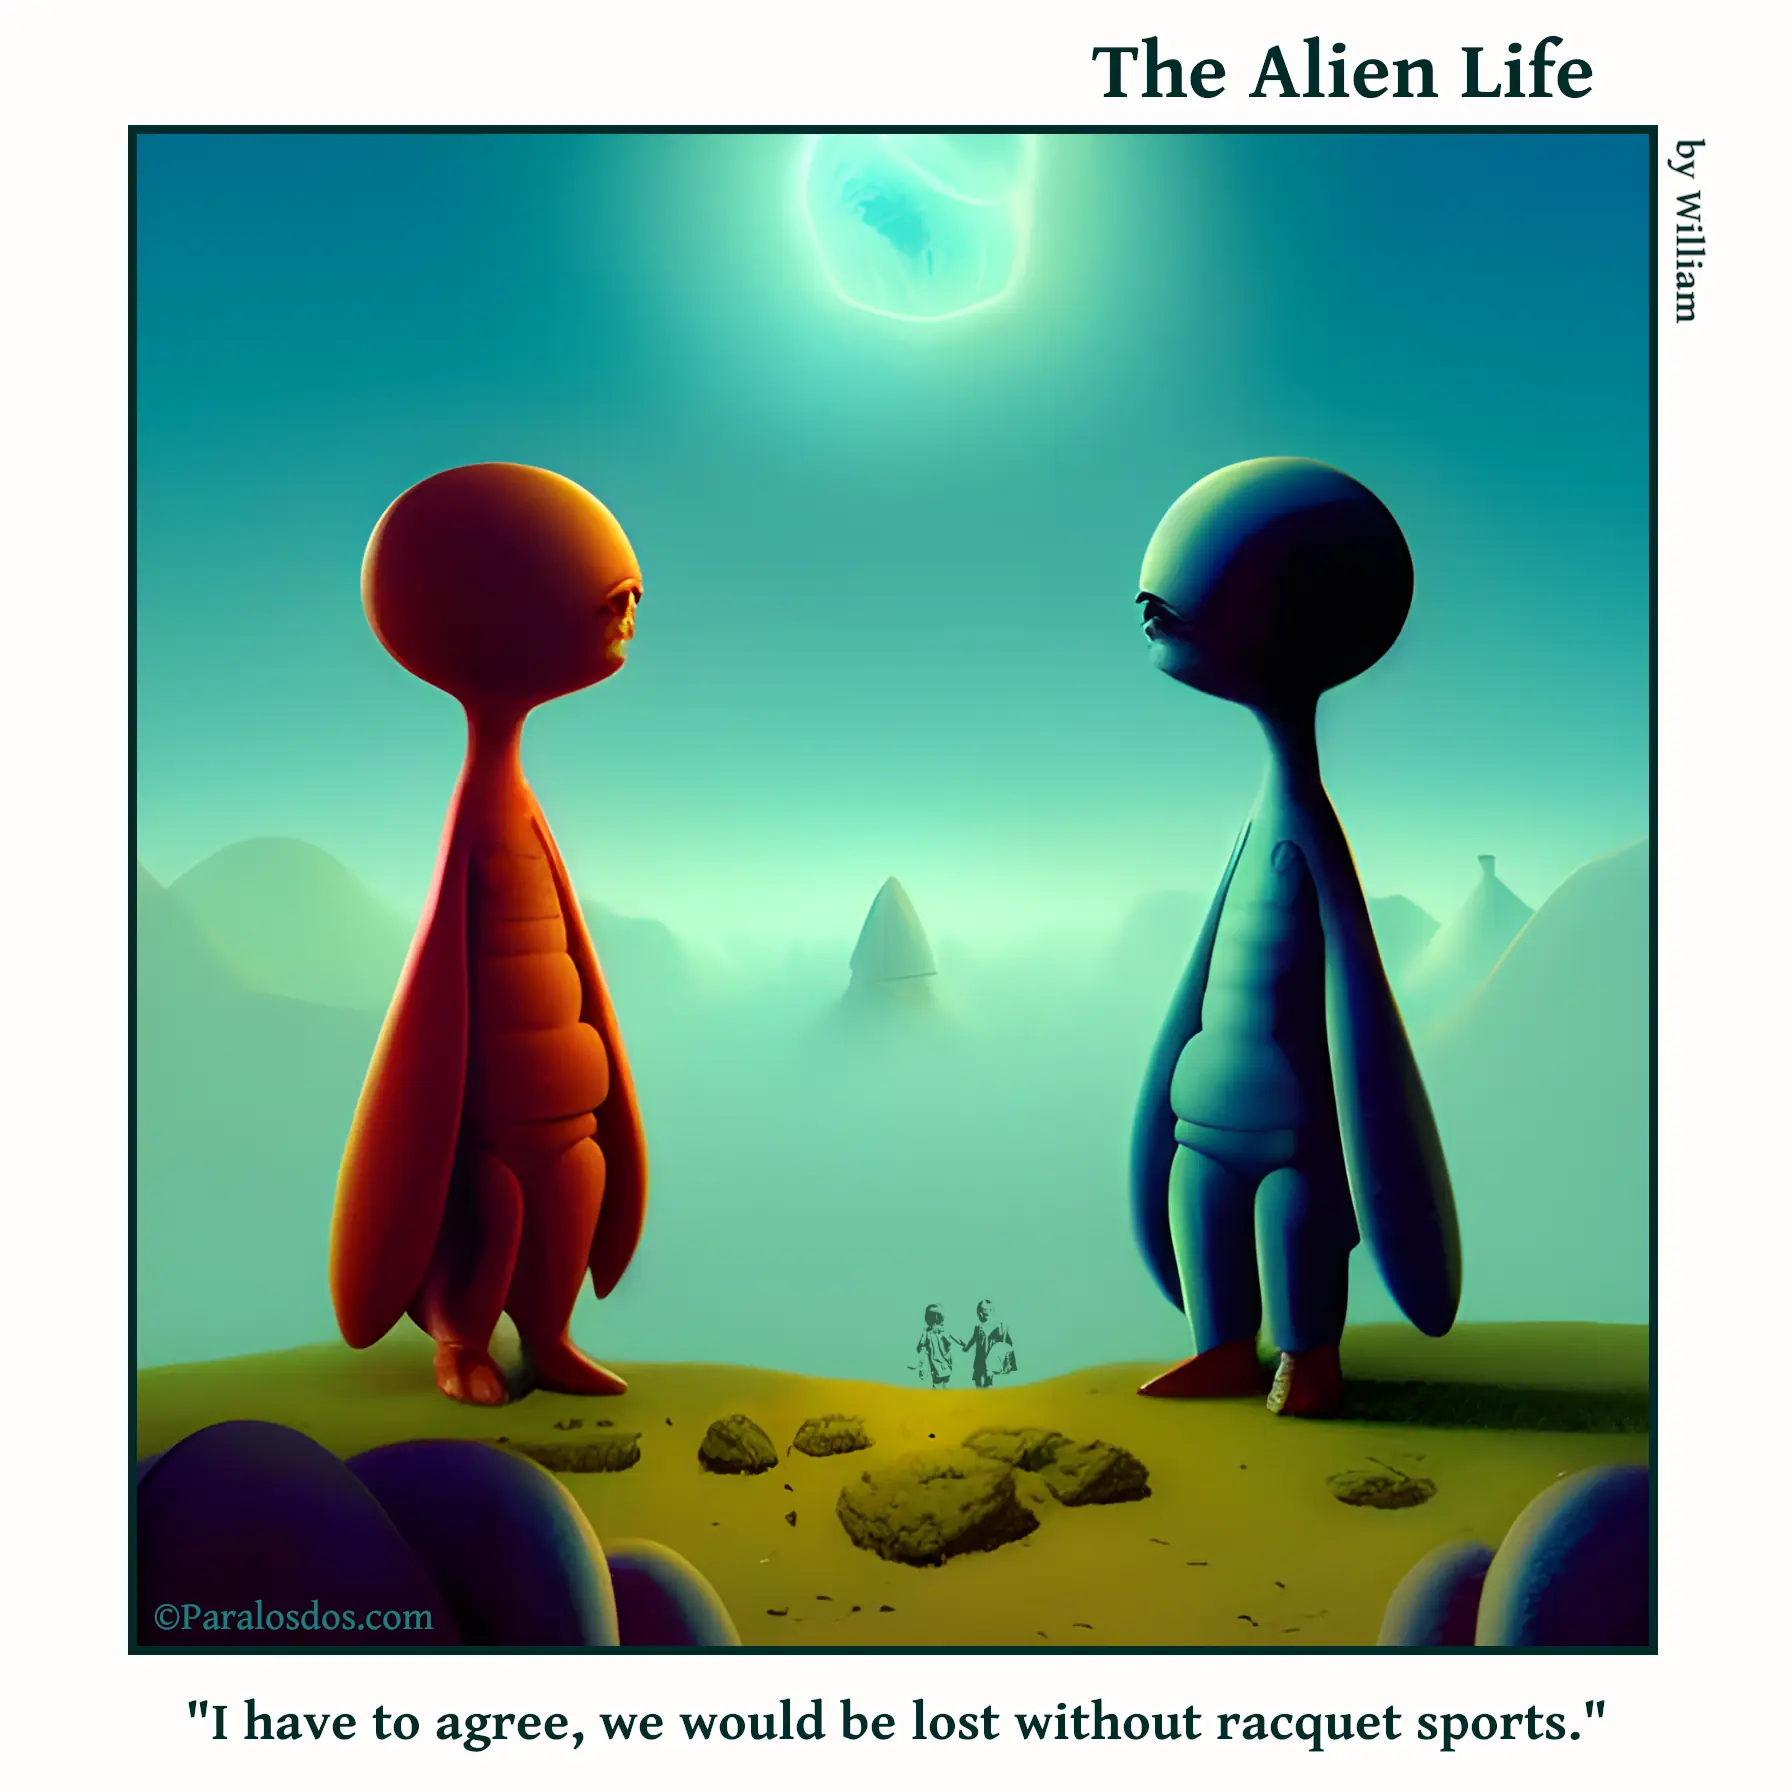 The Alien Life, one panel Comic. Two aliens are standing talking. They have elongated paddles for arms. The caption reads: "I have to agree, we would be lost without racquet sports."